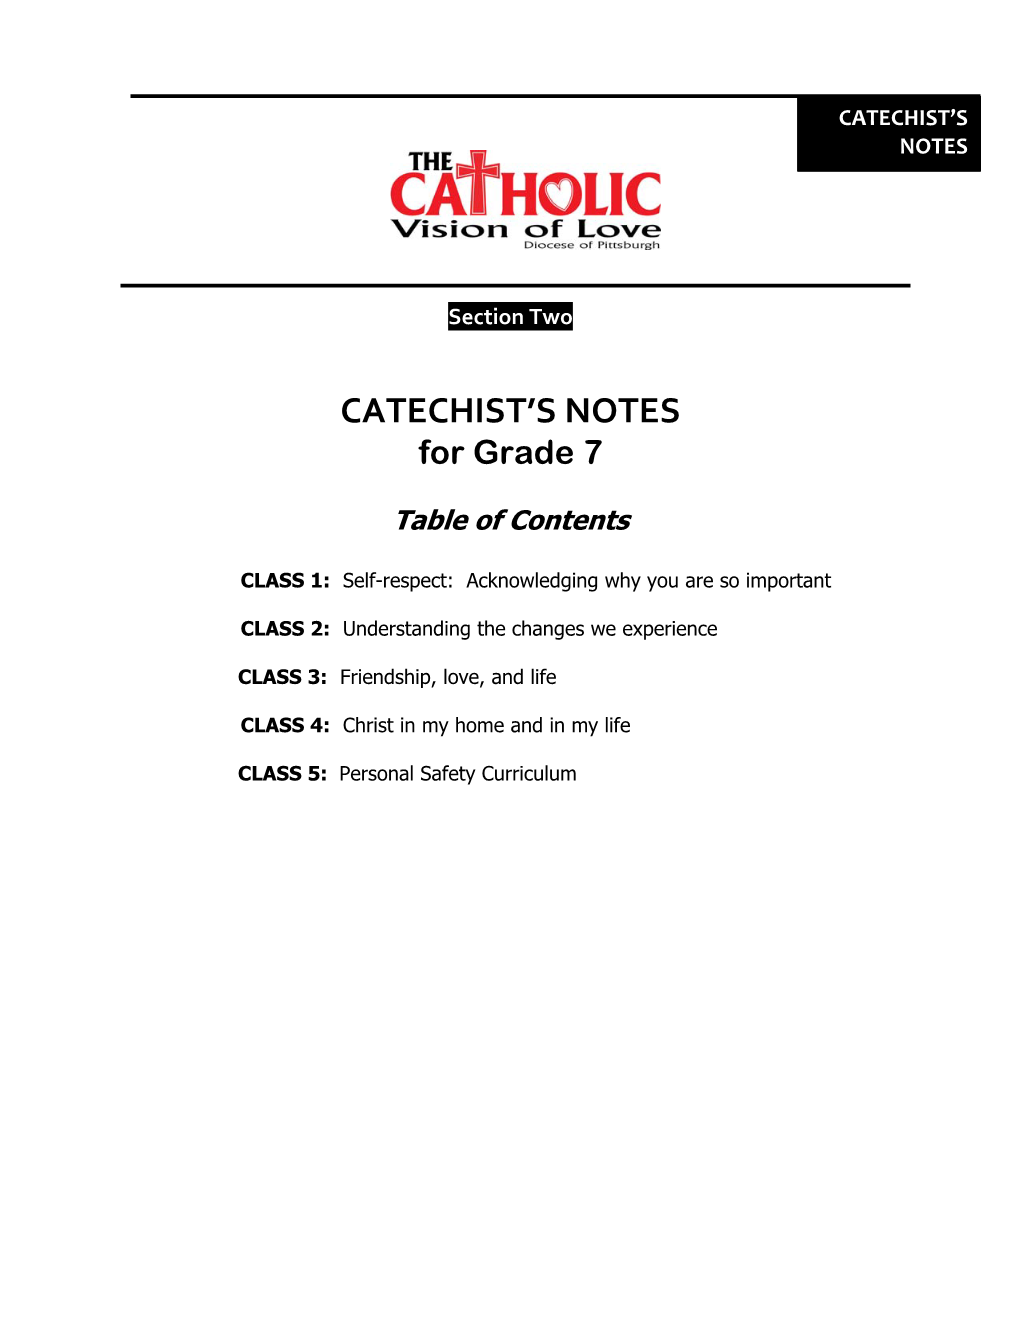 Catechist's Notes